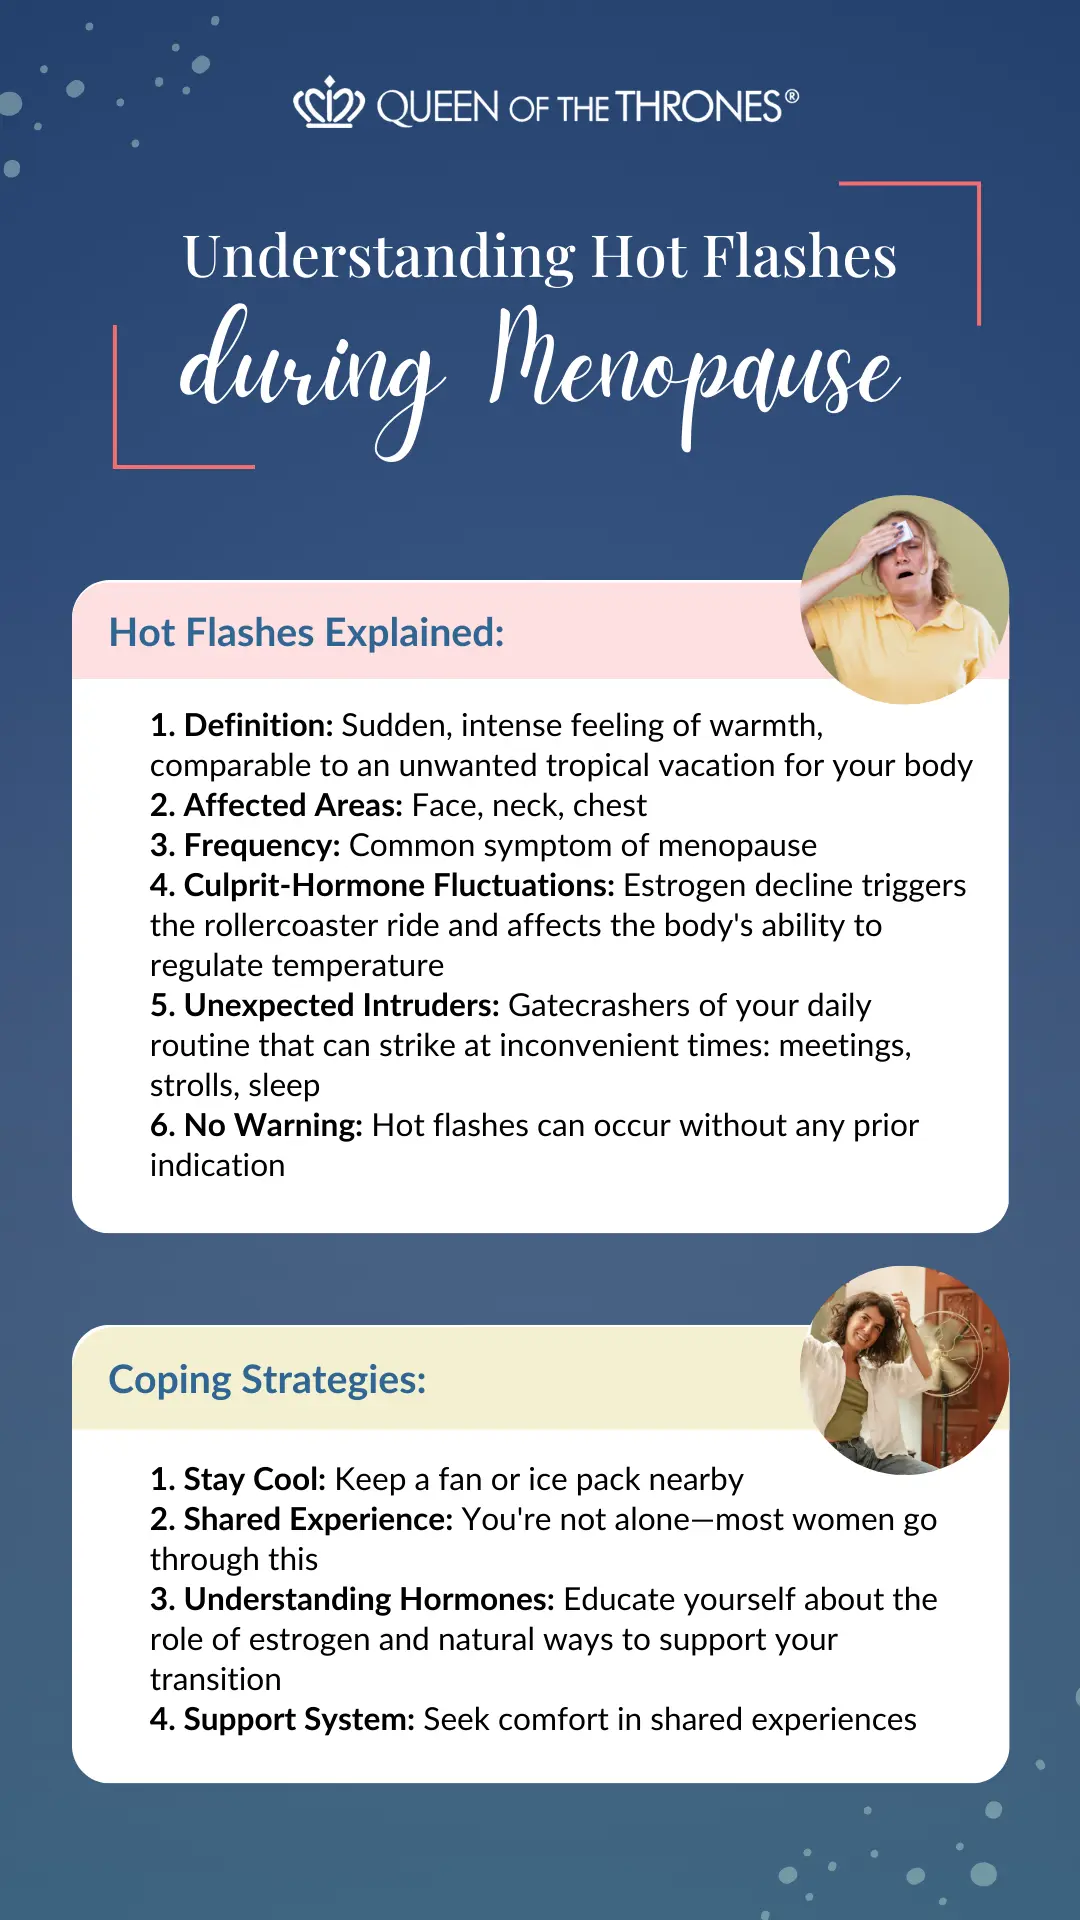 Understanding hot flashes during menopause by Queen of the Thrones